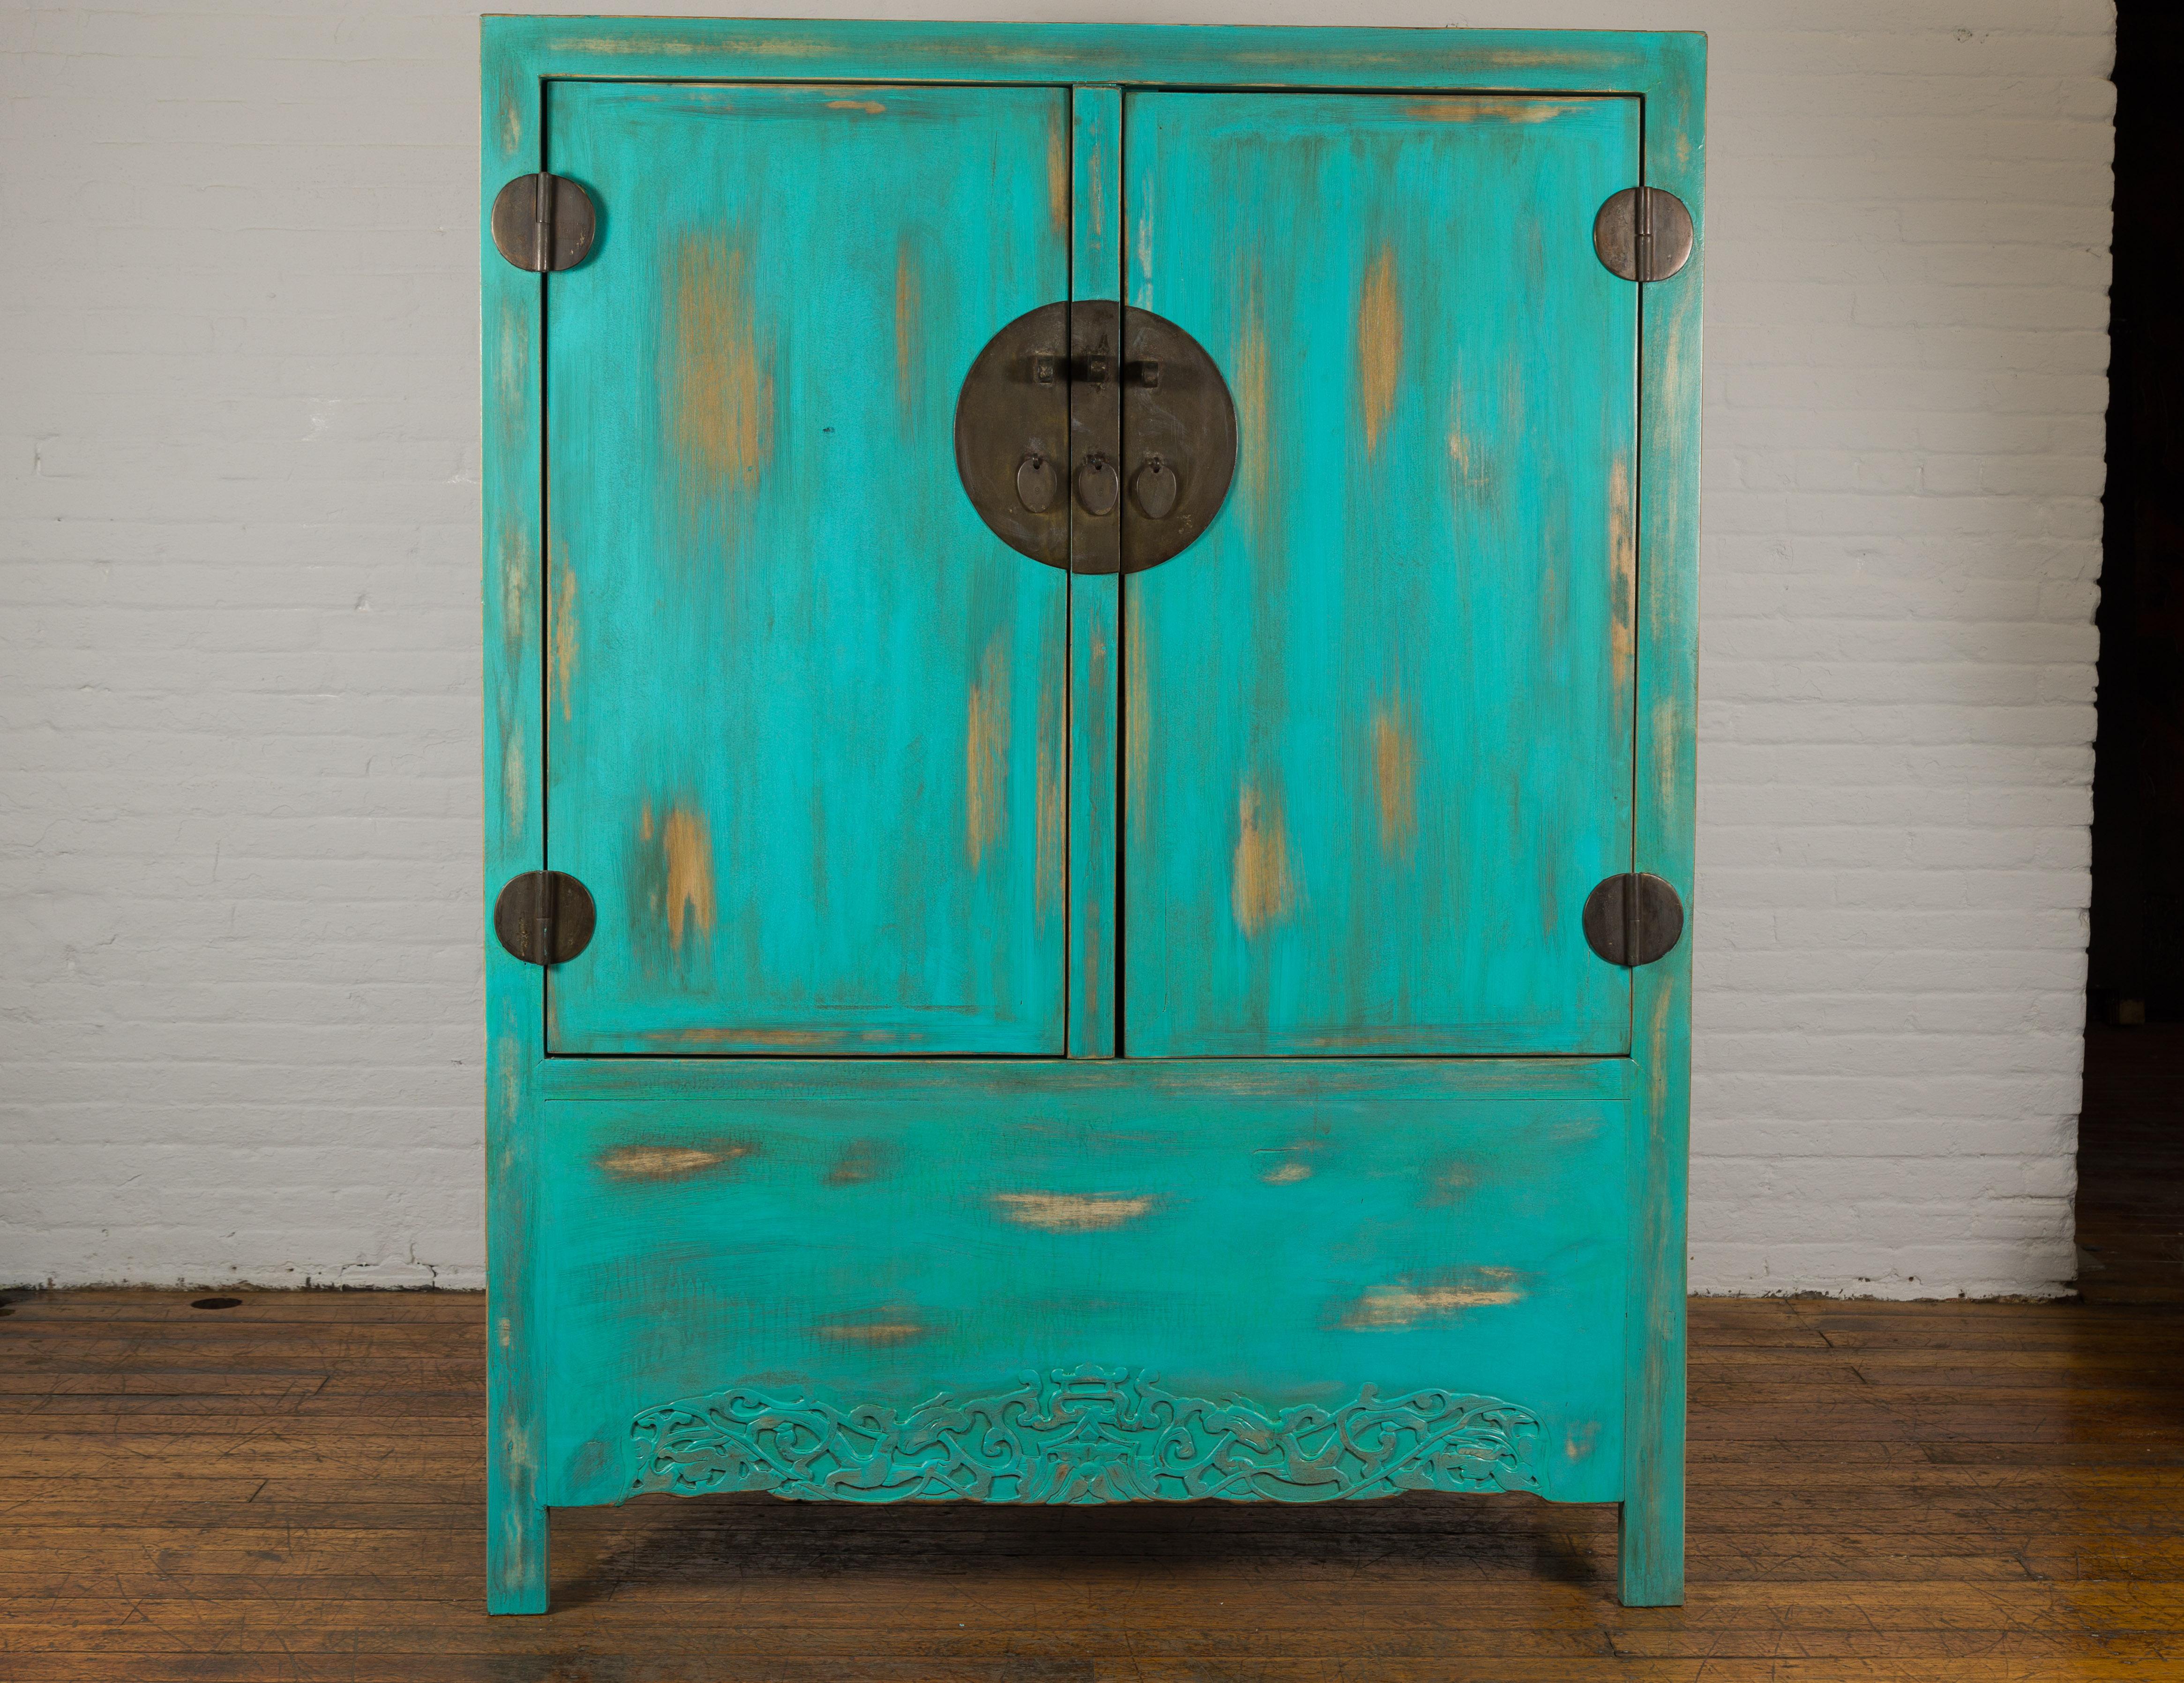 A Chinese Qing Dynasty period cabinet from the 19th century with custom distressed blue green lacquer, carved apron and brass hardware. Immerse yourself in the opulence of ancient China with this Qing Dynasty period cabinet, a splendid marriage of